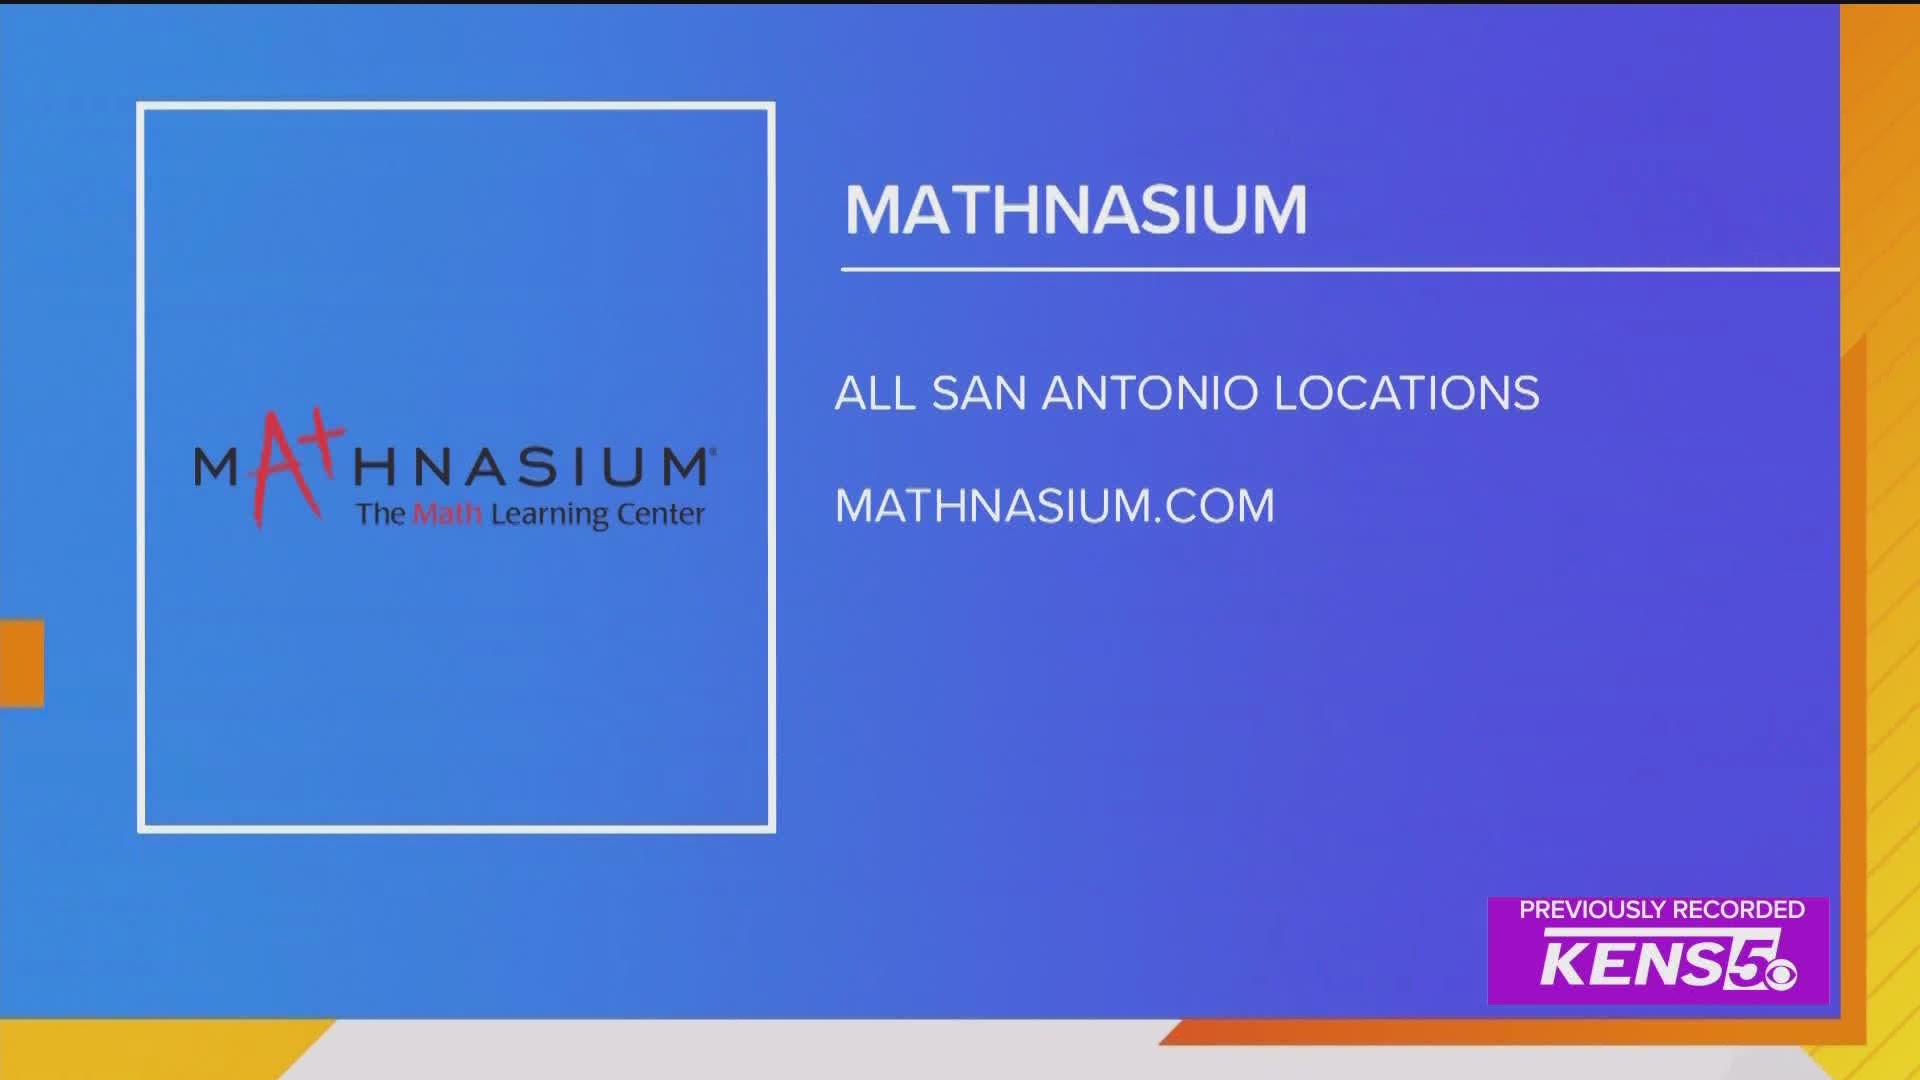 If you need to sharpen your math skills or you need extra help in an area you struggle with, Mathnasium is here for you!